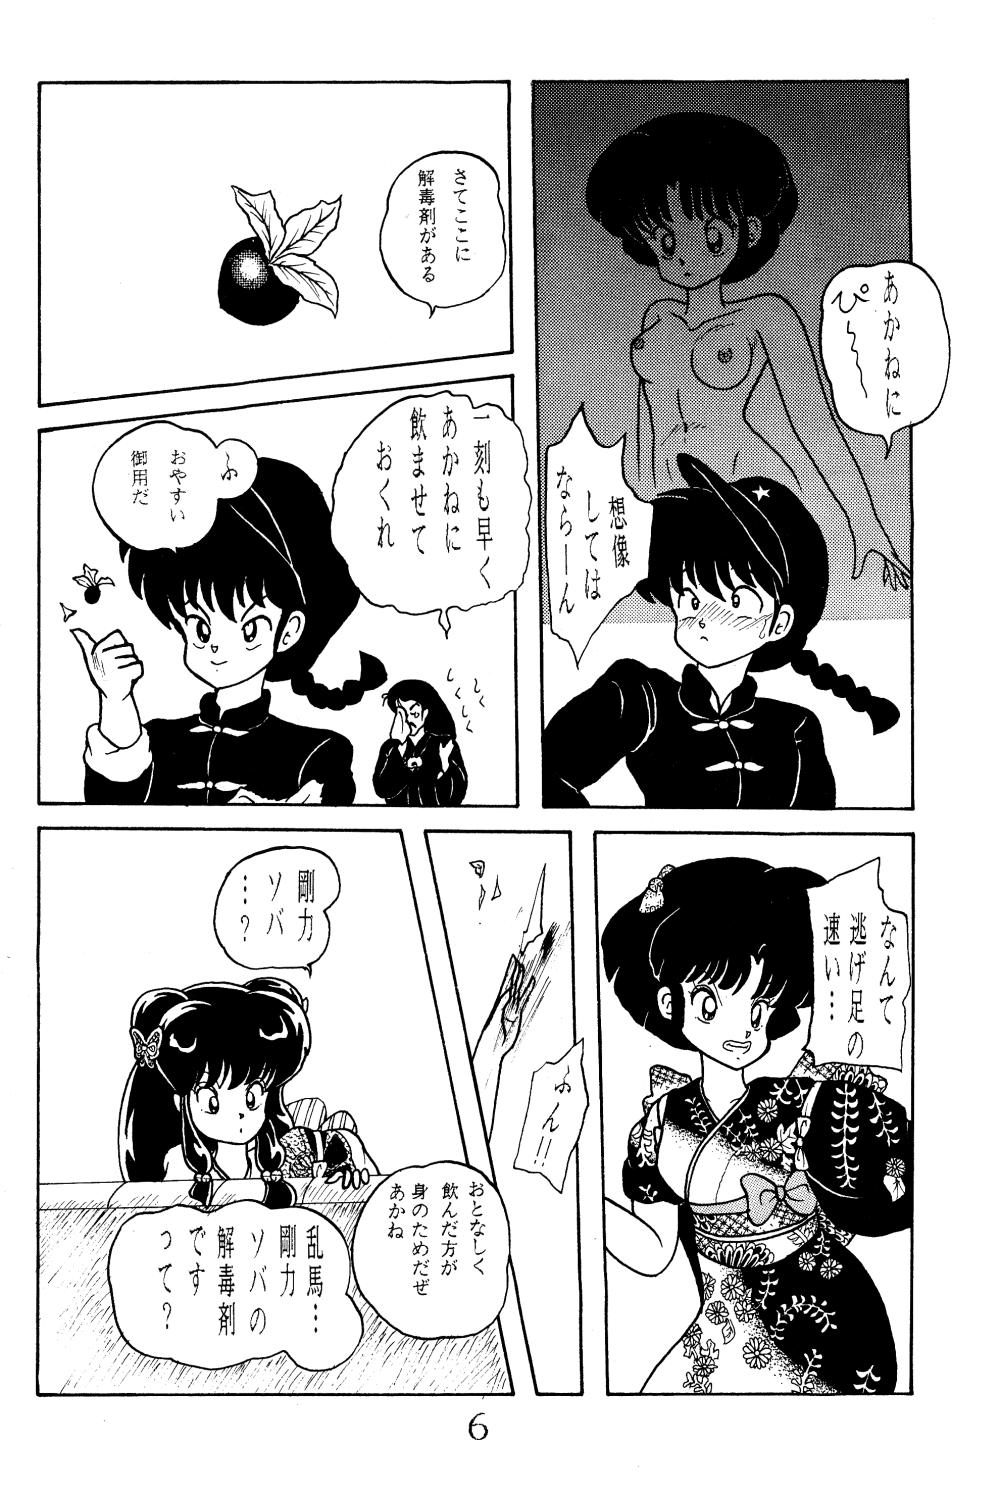 NOTORIOUS Ranma 1/2 Special 5